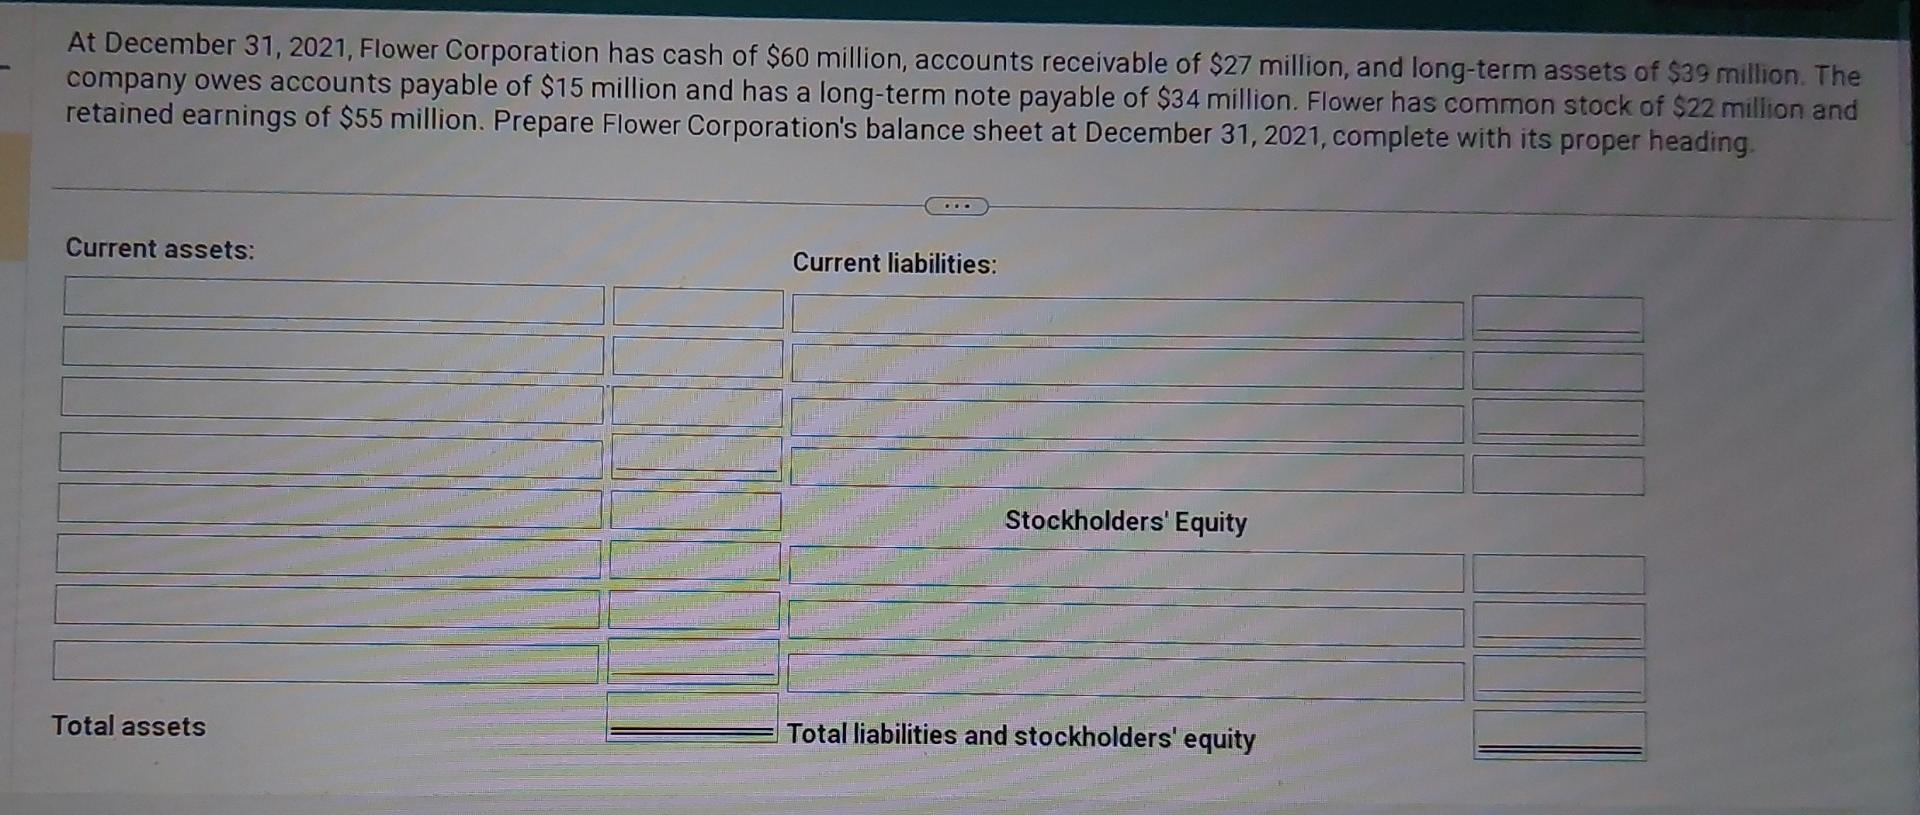 At December 31, 2021, Flower Corporation has cash of $60 million, accounts receivable of $27 million, and